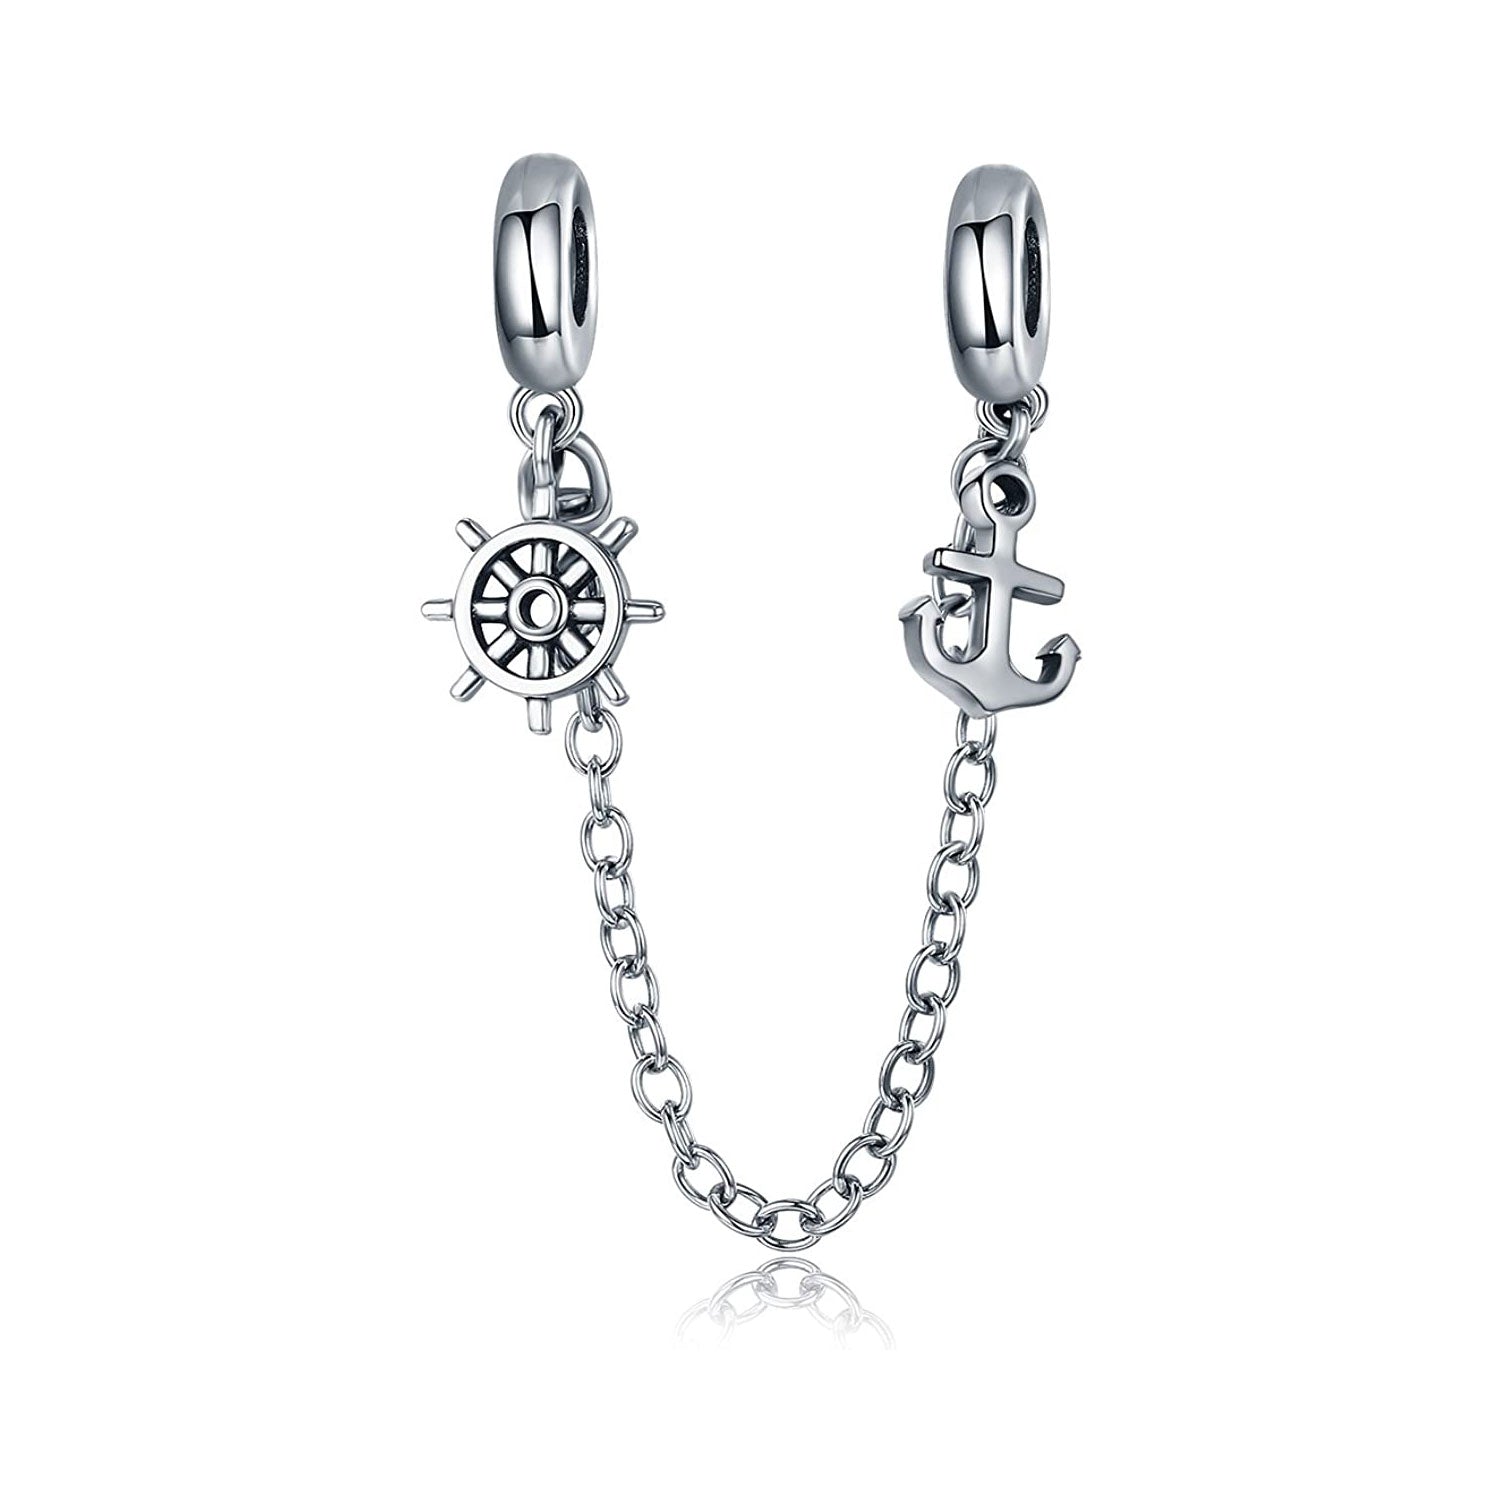 Jewdii 925 Silver Rudder & Anchor Traveling Safety Chain